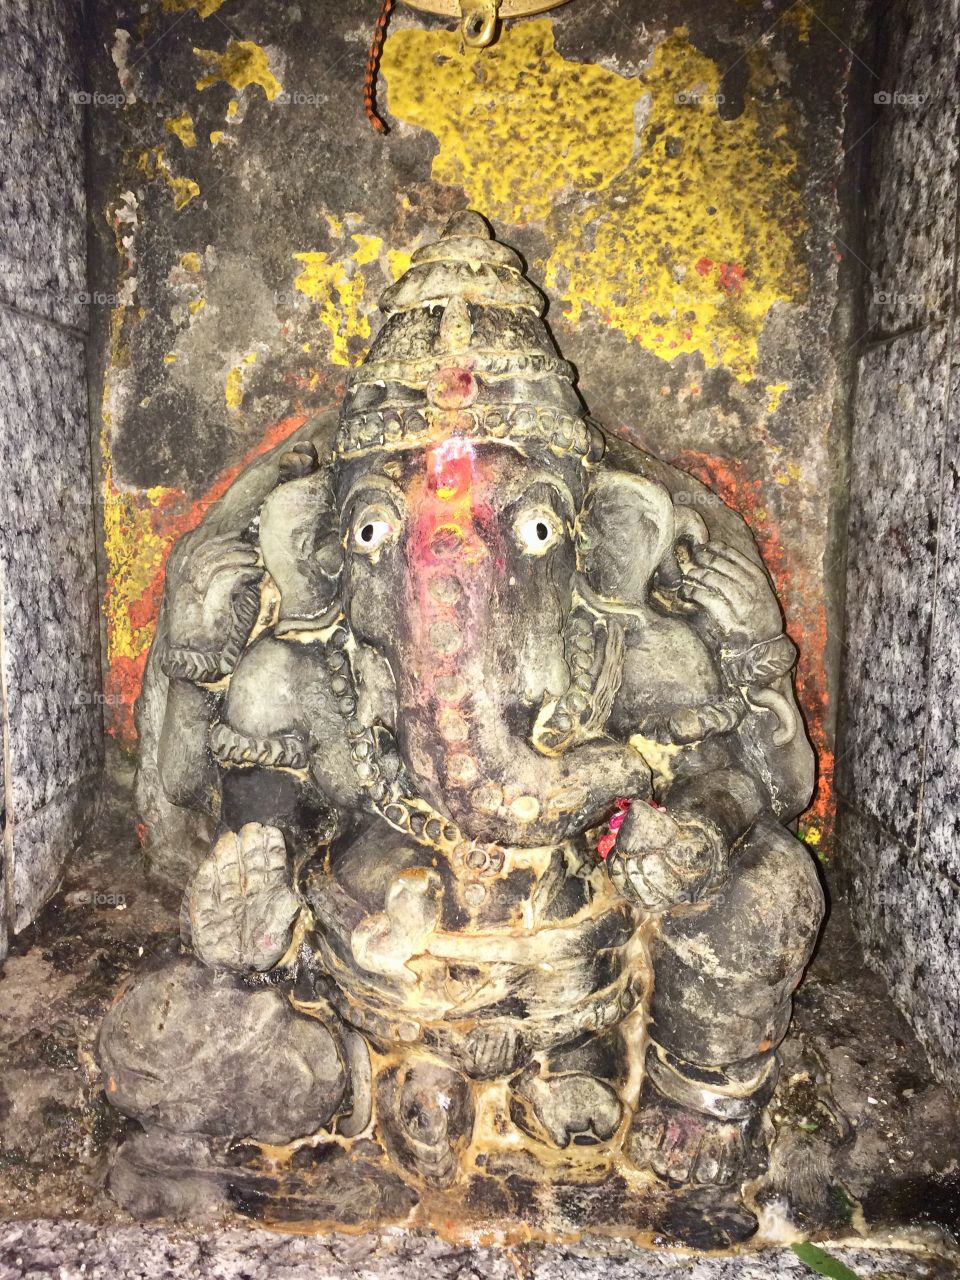 Antique statue of lord ganesha